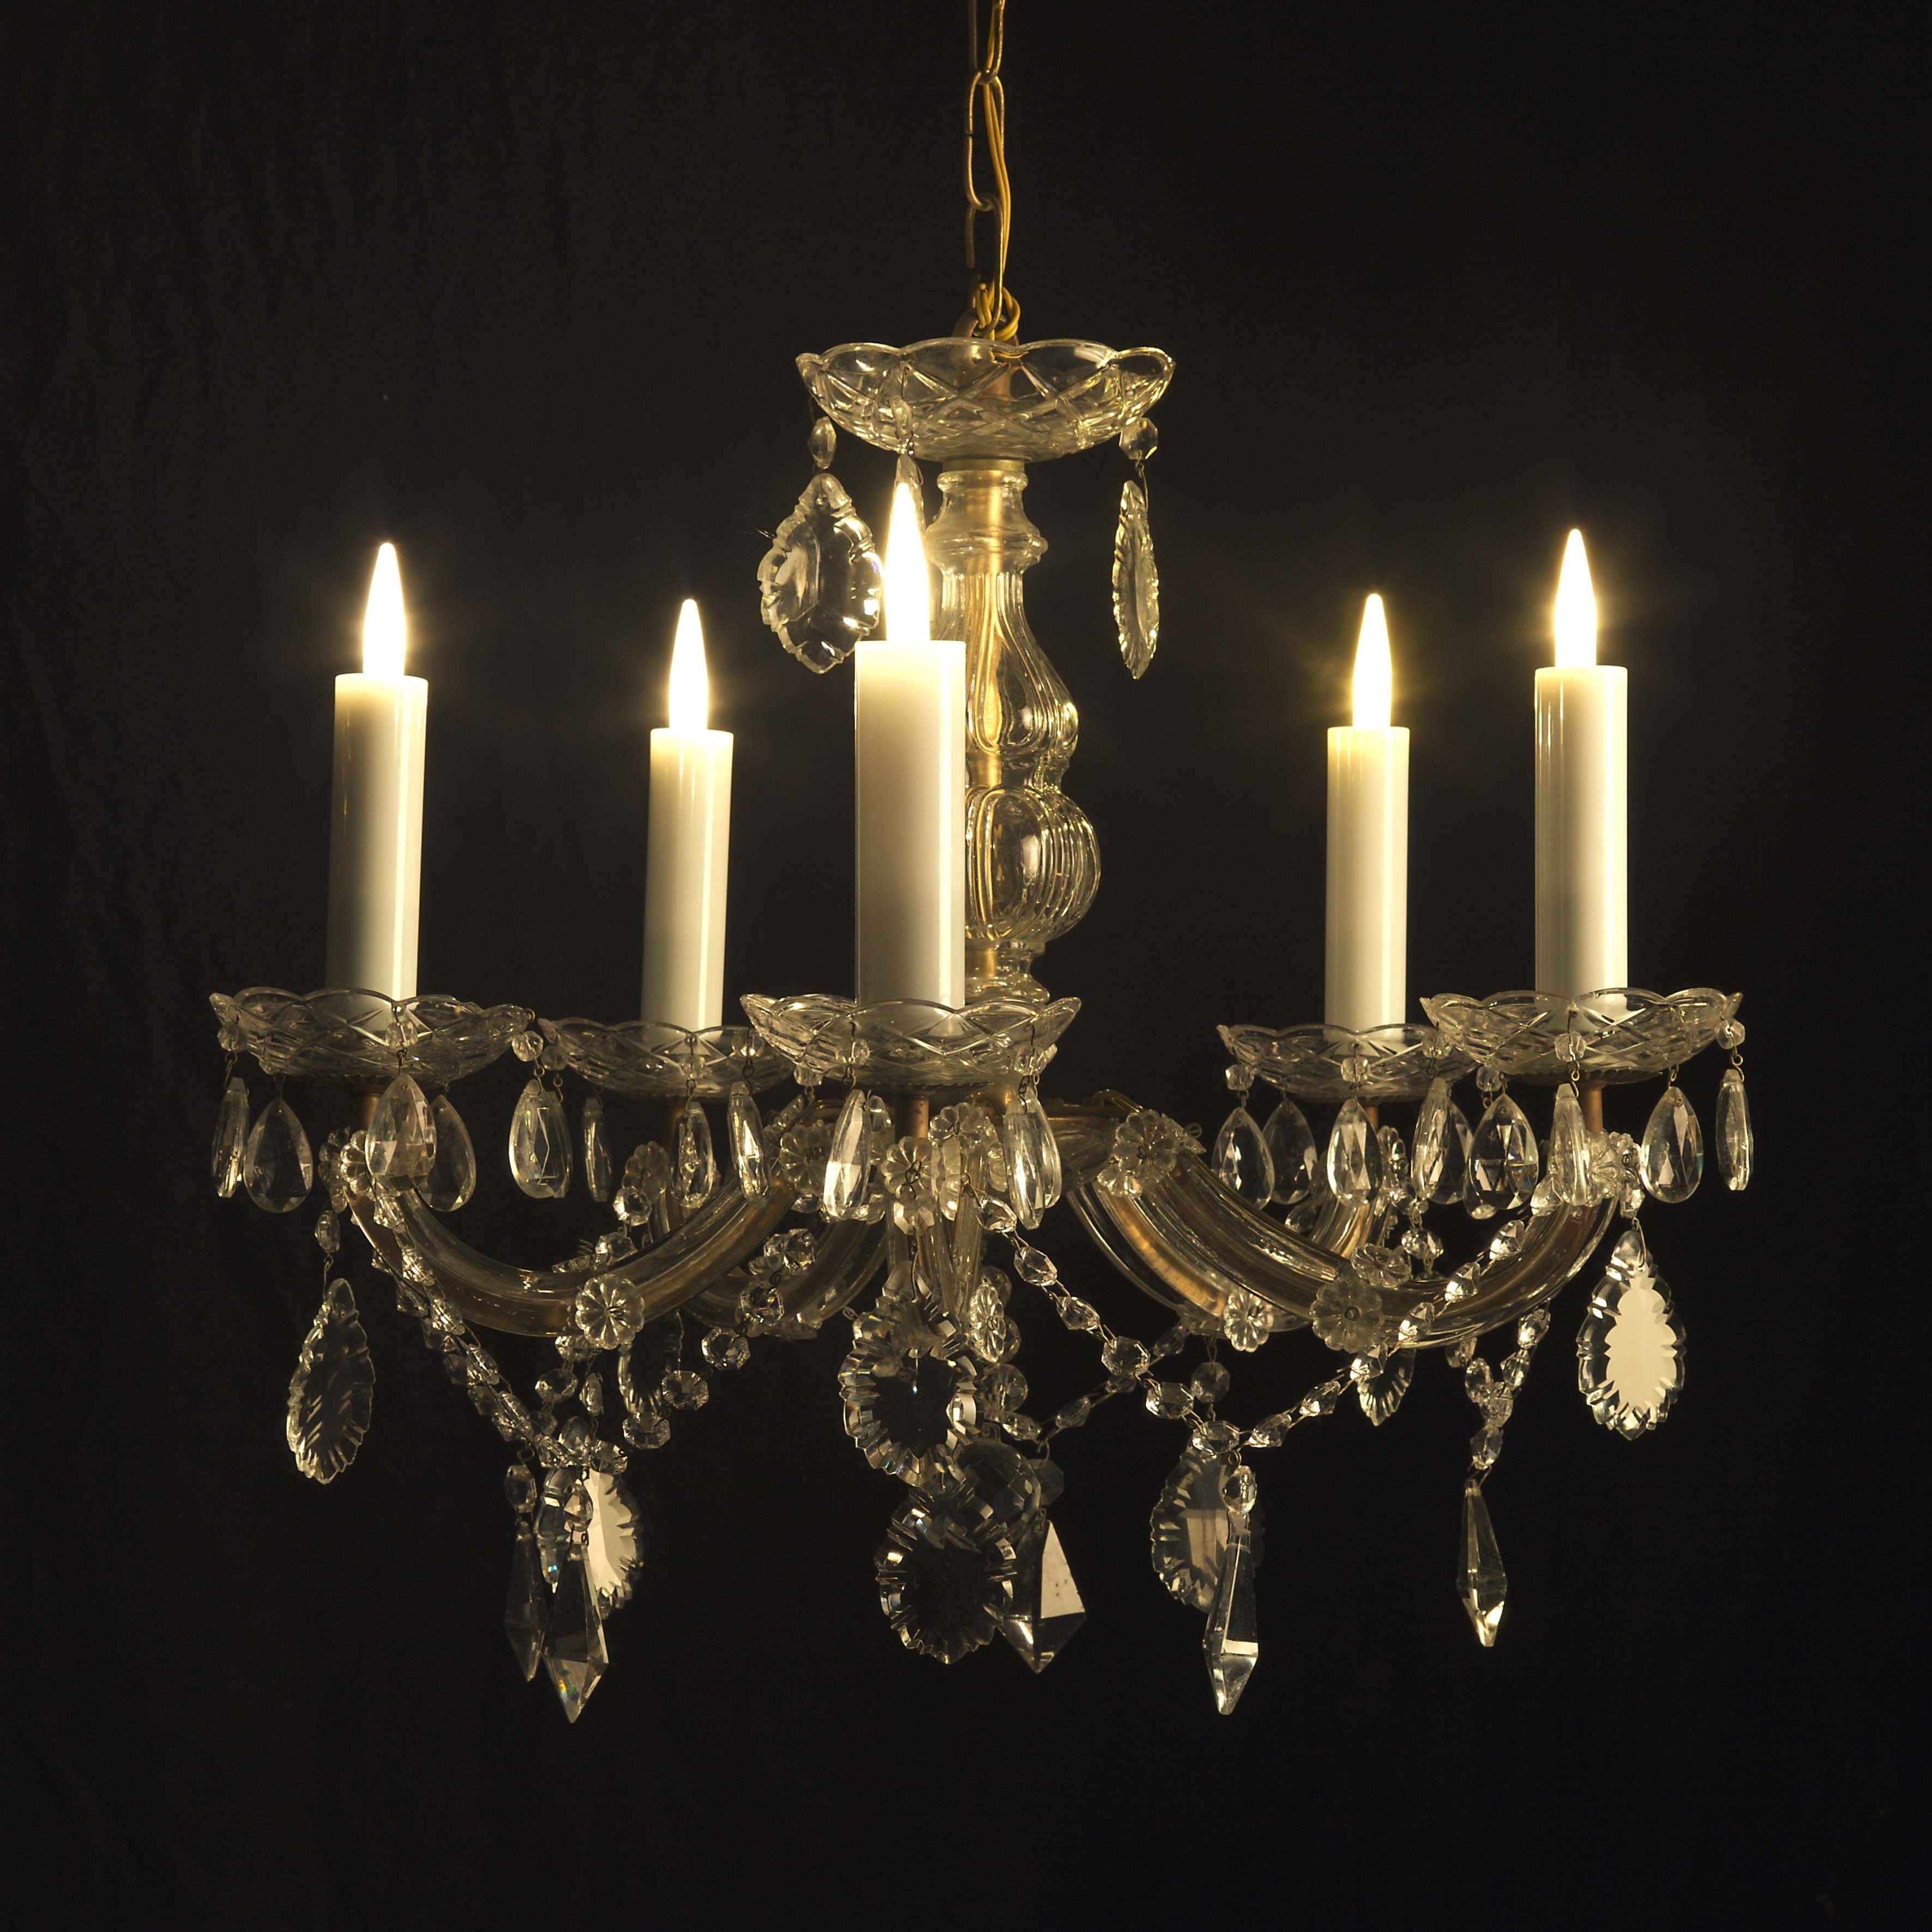 2017 Candle Chandelier Regarding Home Design : Exquisite Led Candle Chandelier Kevin Reilly Altar (Photo 5 of 15)